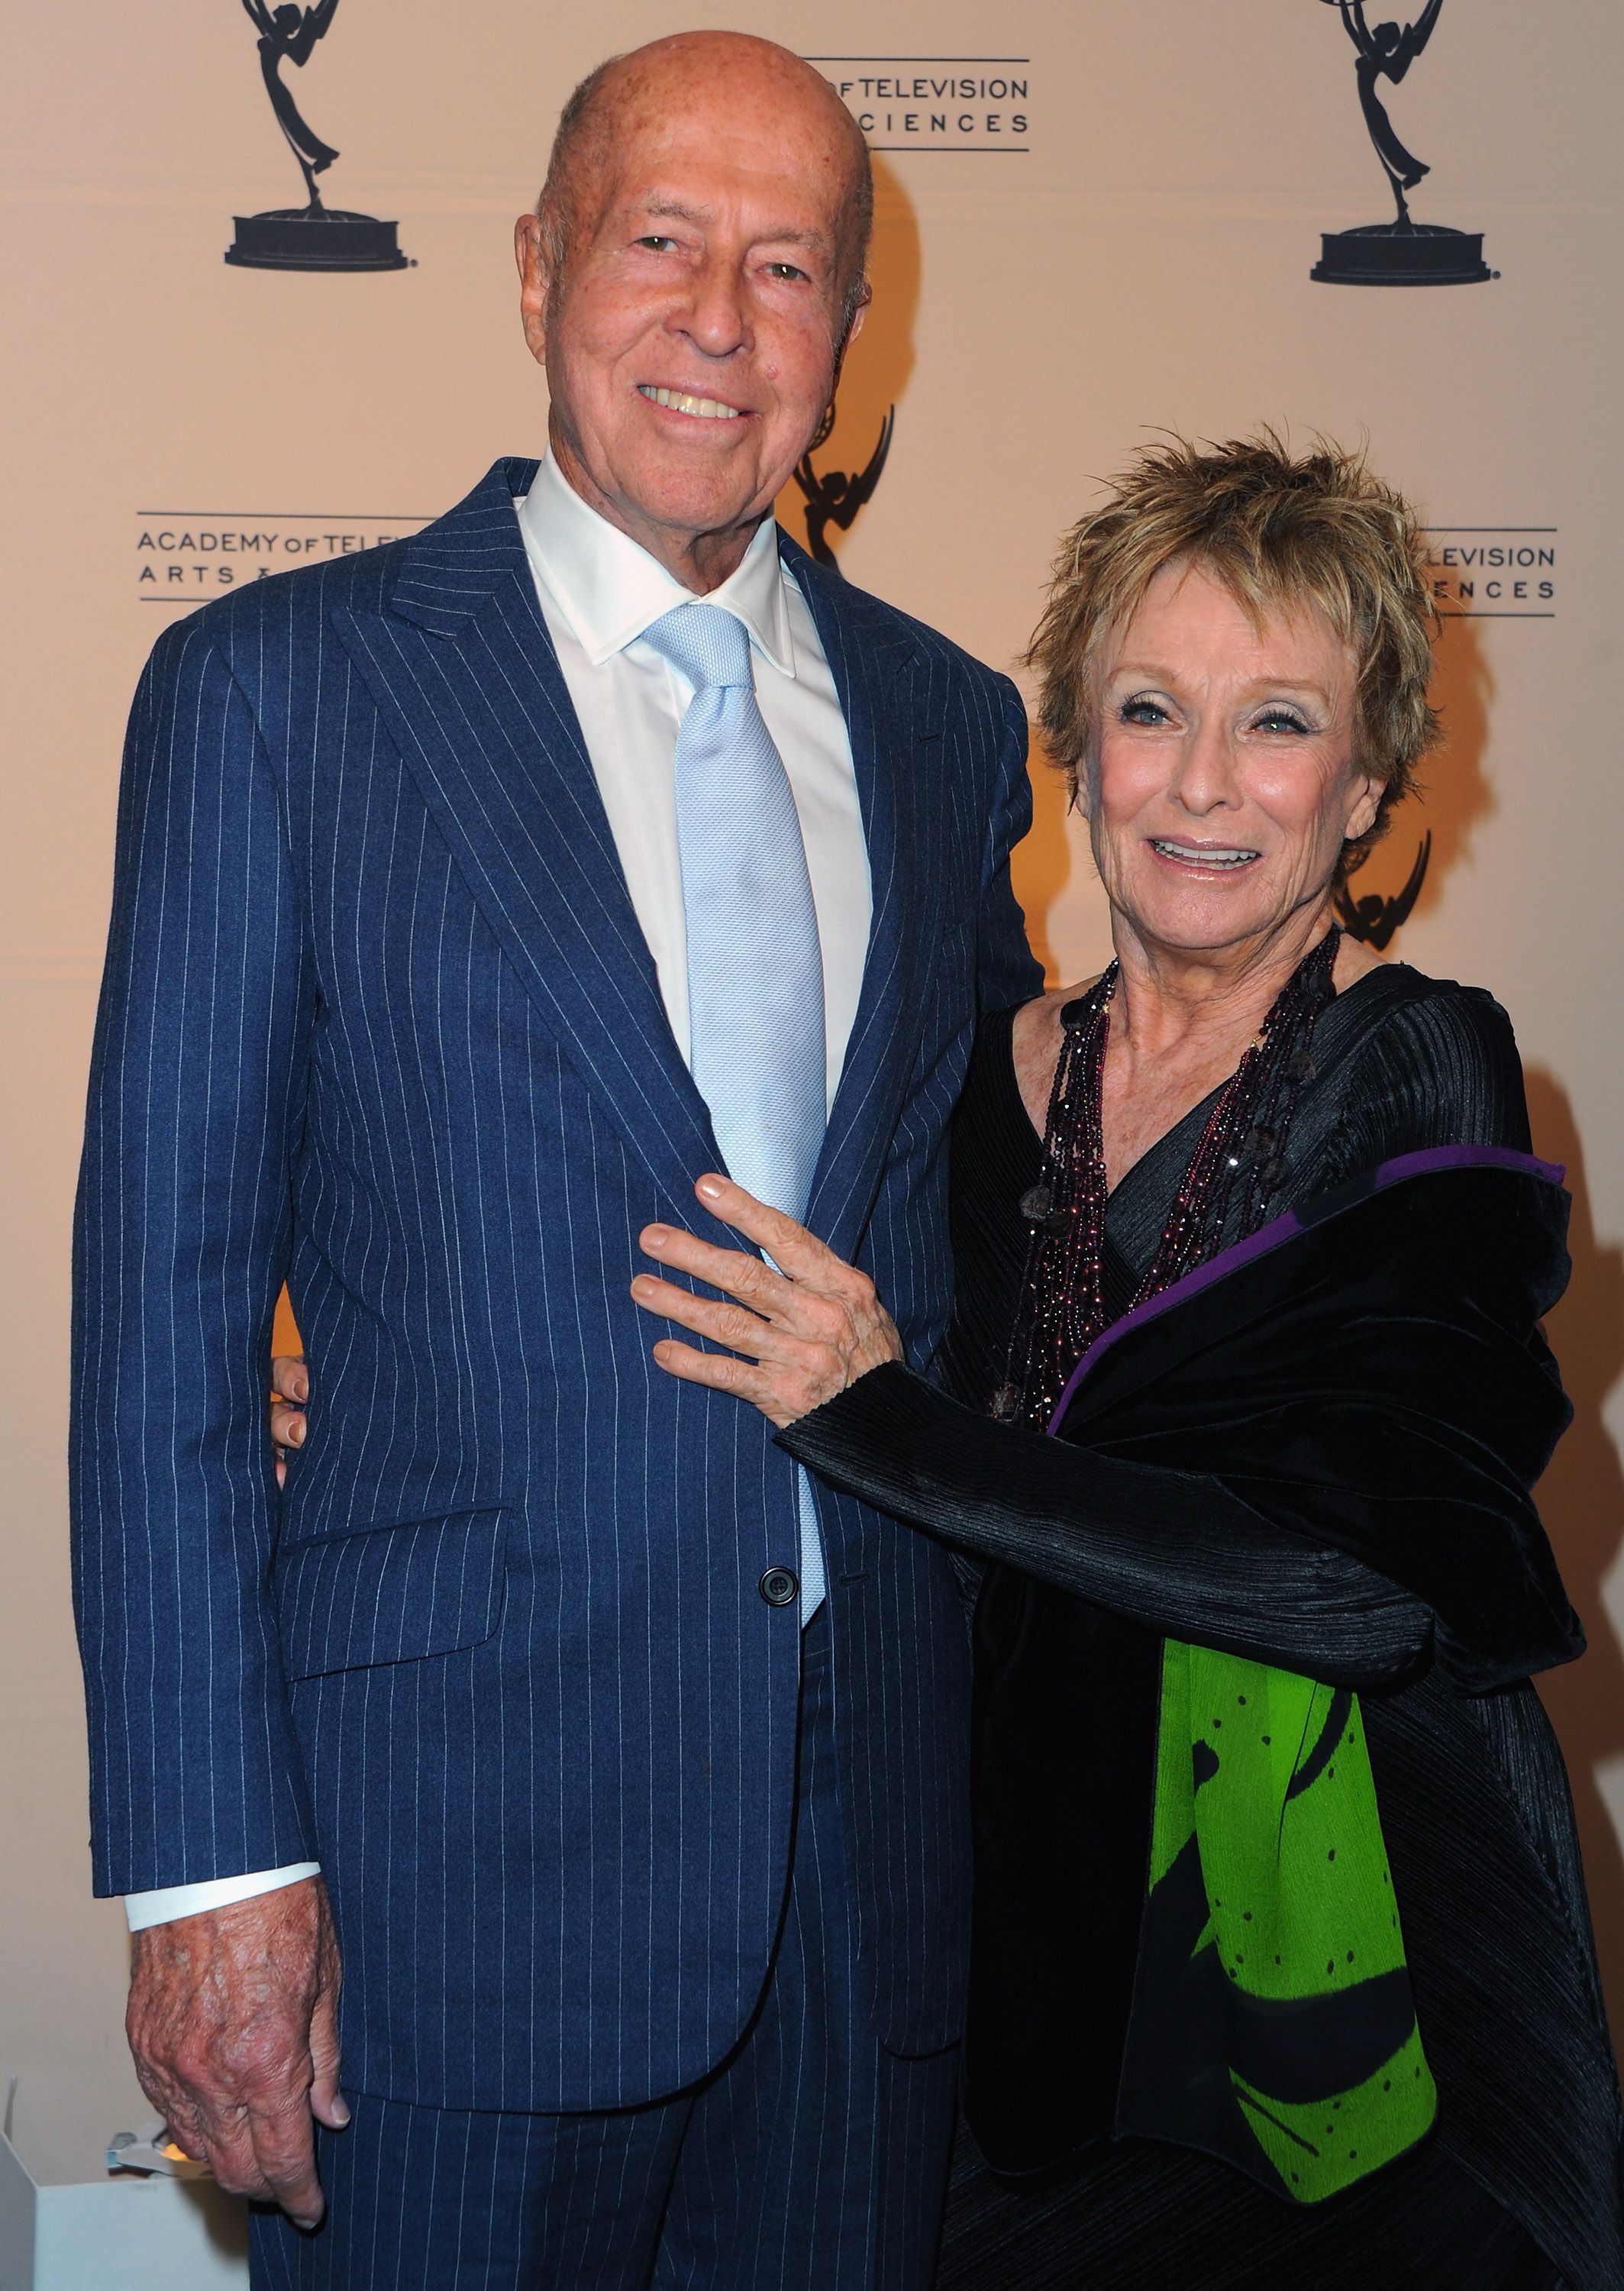 George Englund and Cloris Leachman at the Academy of Television Arts & Sciences' Hall of Fame Committee's 20th Annual Induction Gala on January 20, 2011 | Photo: Alberto E. Rodriguez/Getty Images